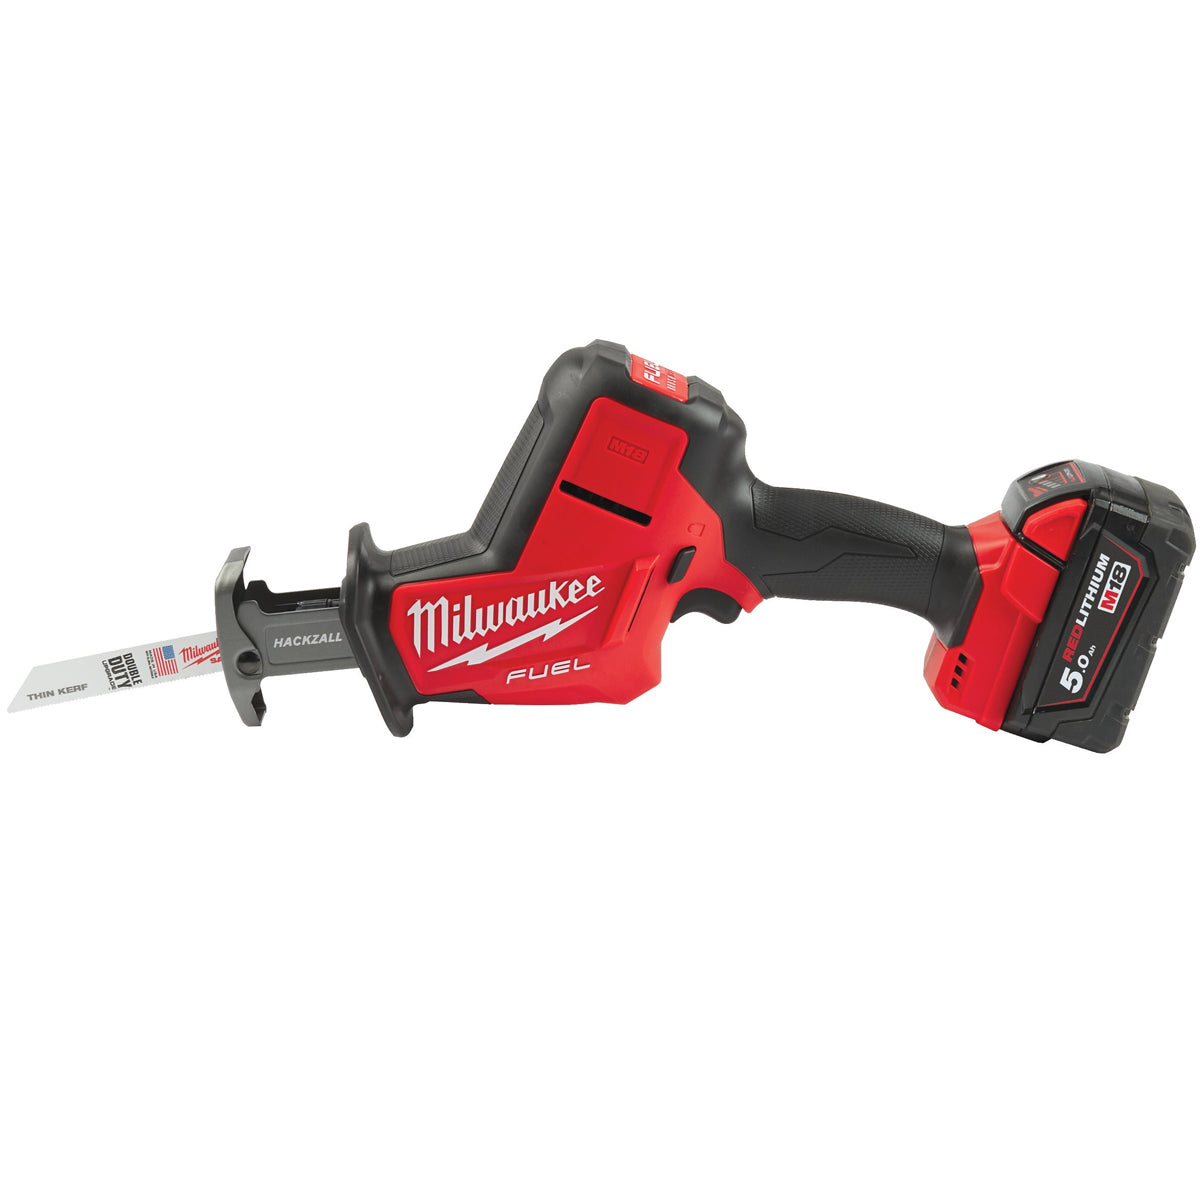 Milwaukee M18 FHZ-0 18V Fuel Brushless Hackzall Reciprocating Saw with 1 x 5.0Ah Battery